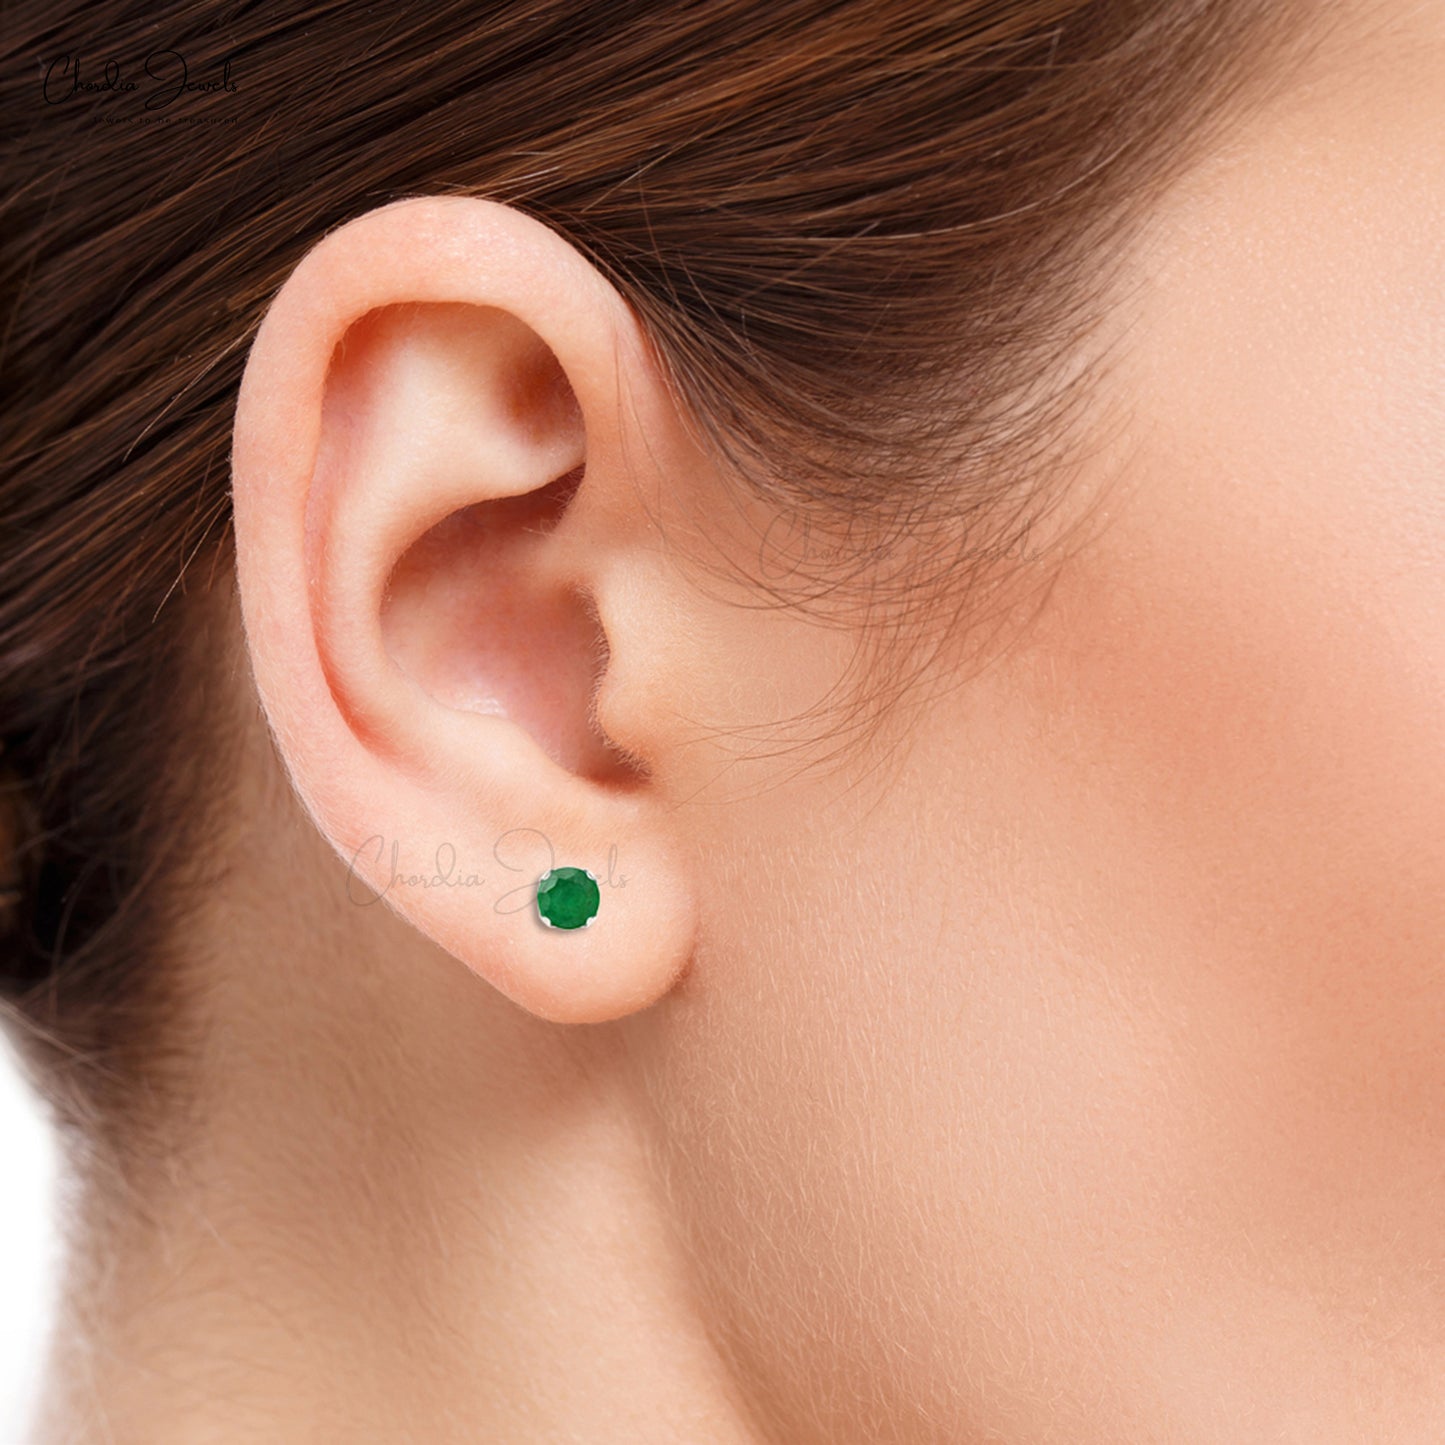 Make a statement with small emerald earrings.